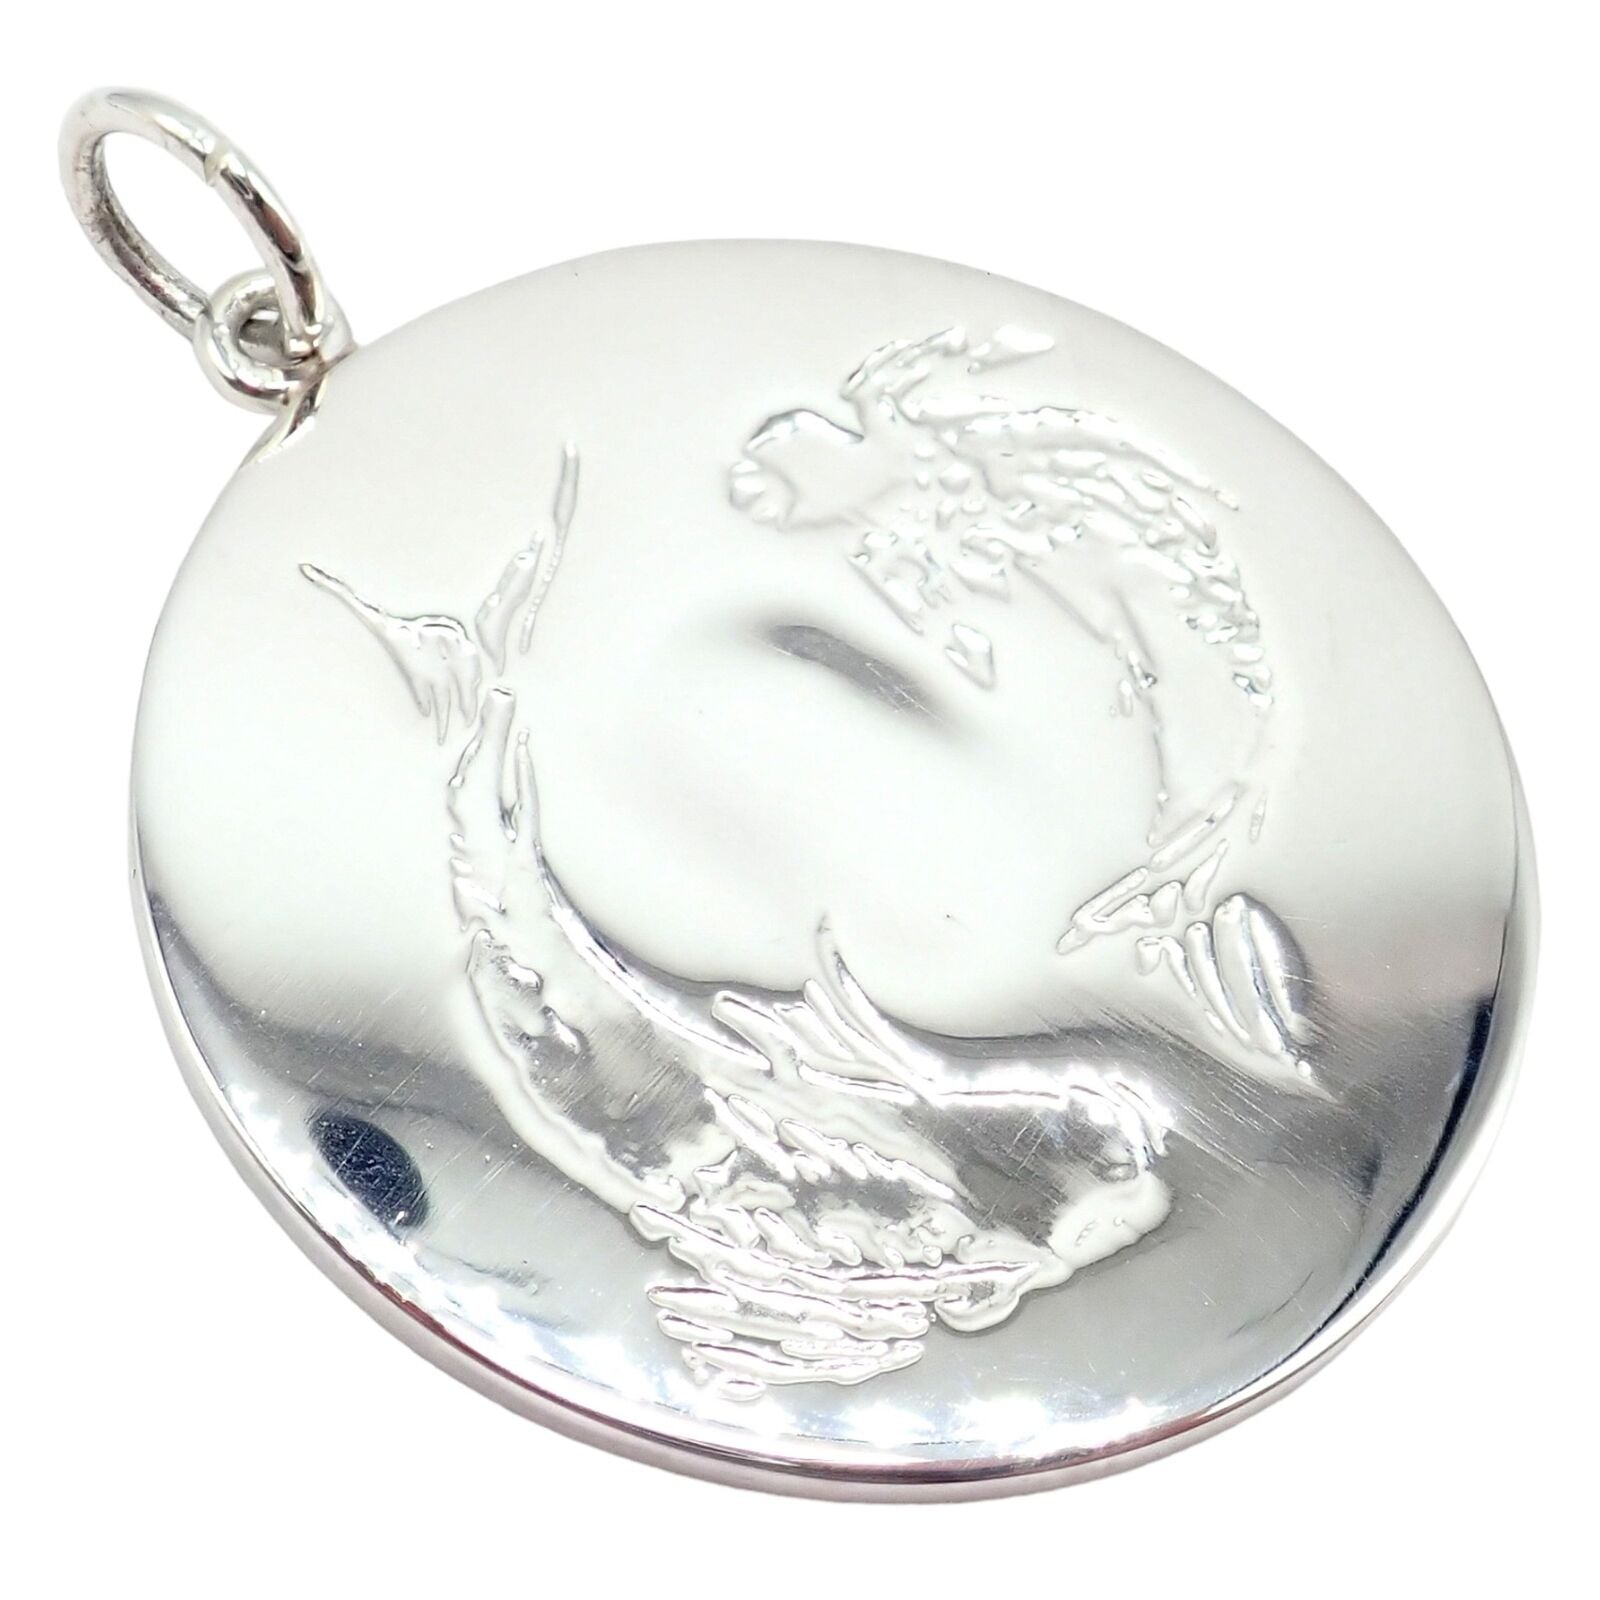 1970s Tiffany and Co. Pisces Zodiac Pendant at 1stDibs